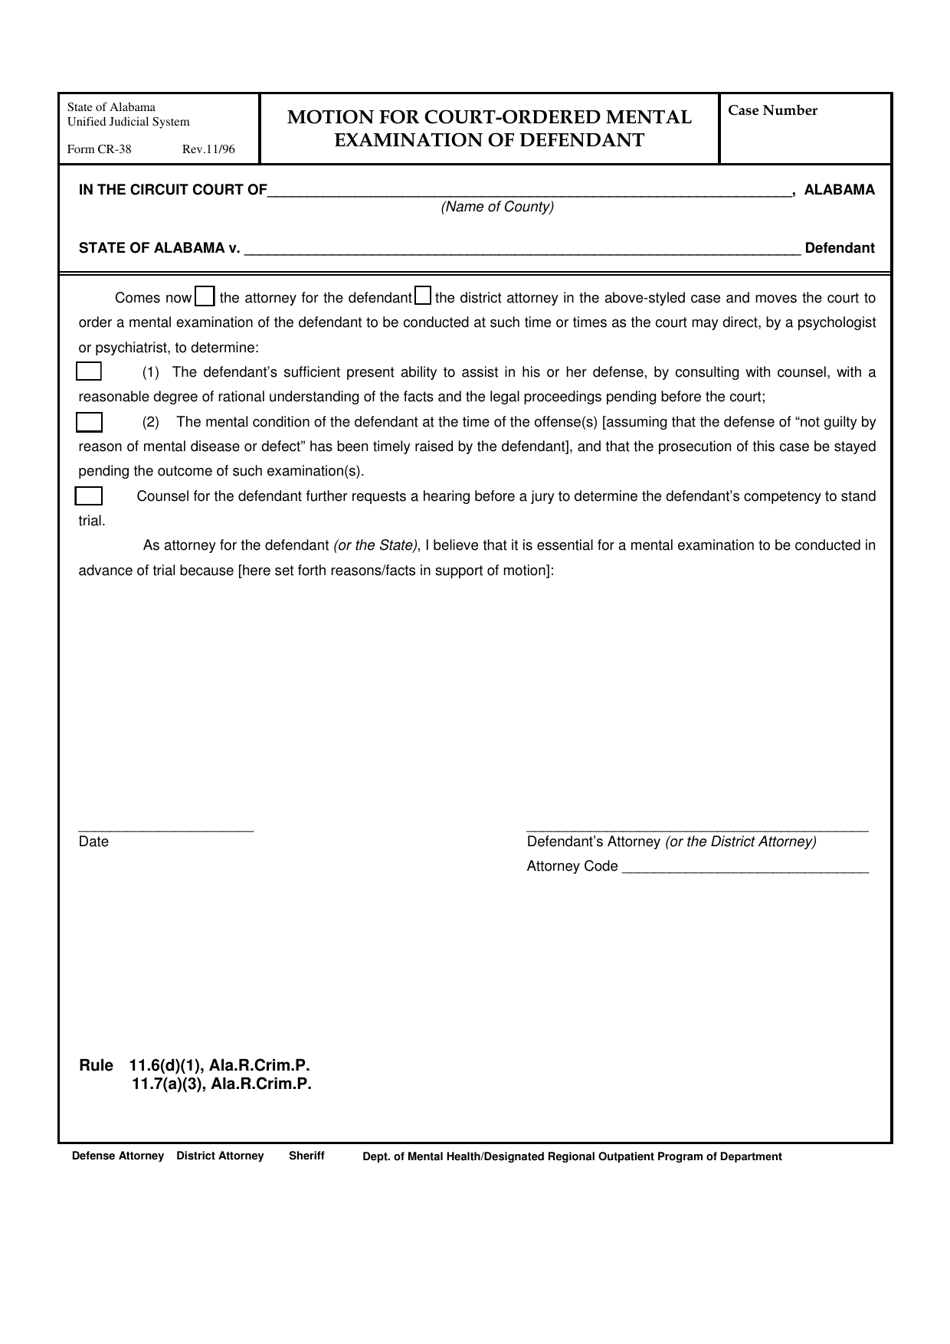 Form CR-38 Motion for Court-Ordered Mental Examination of Defendant - Alabama, Page 1